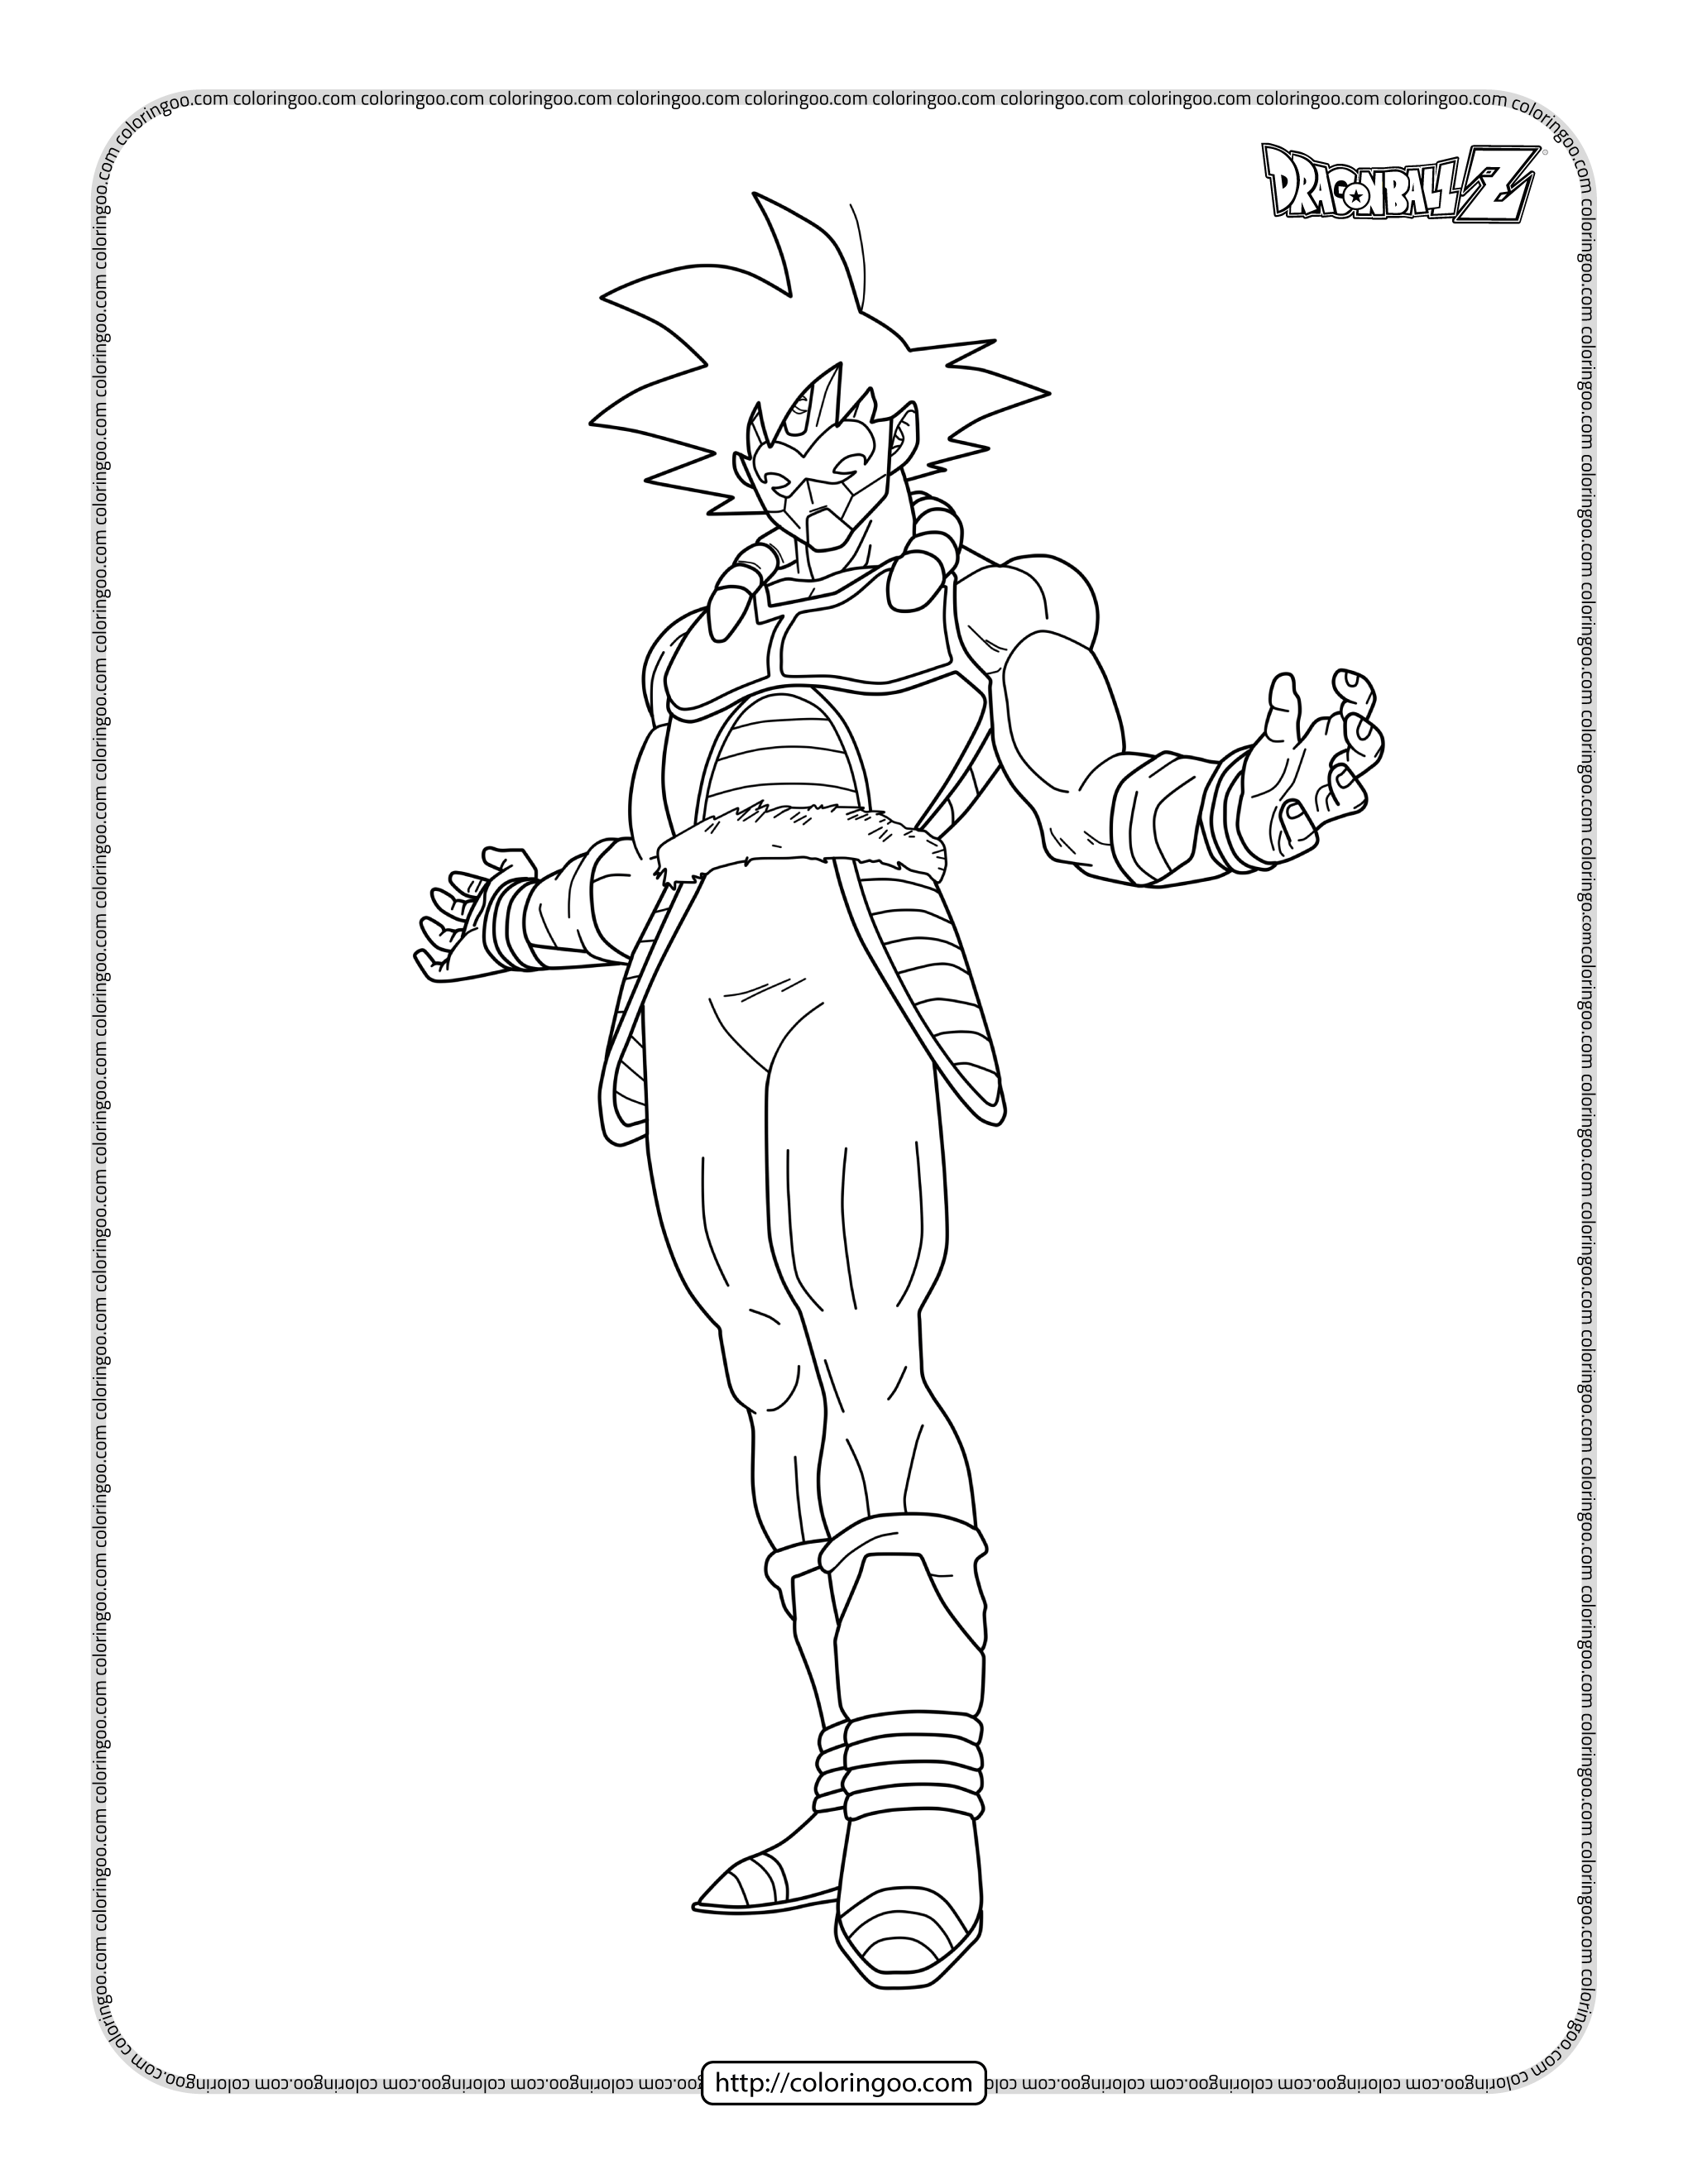 dragonball evil bardock coloring pages